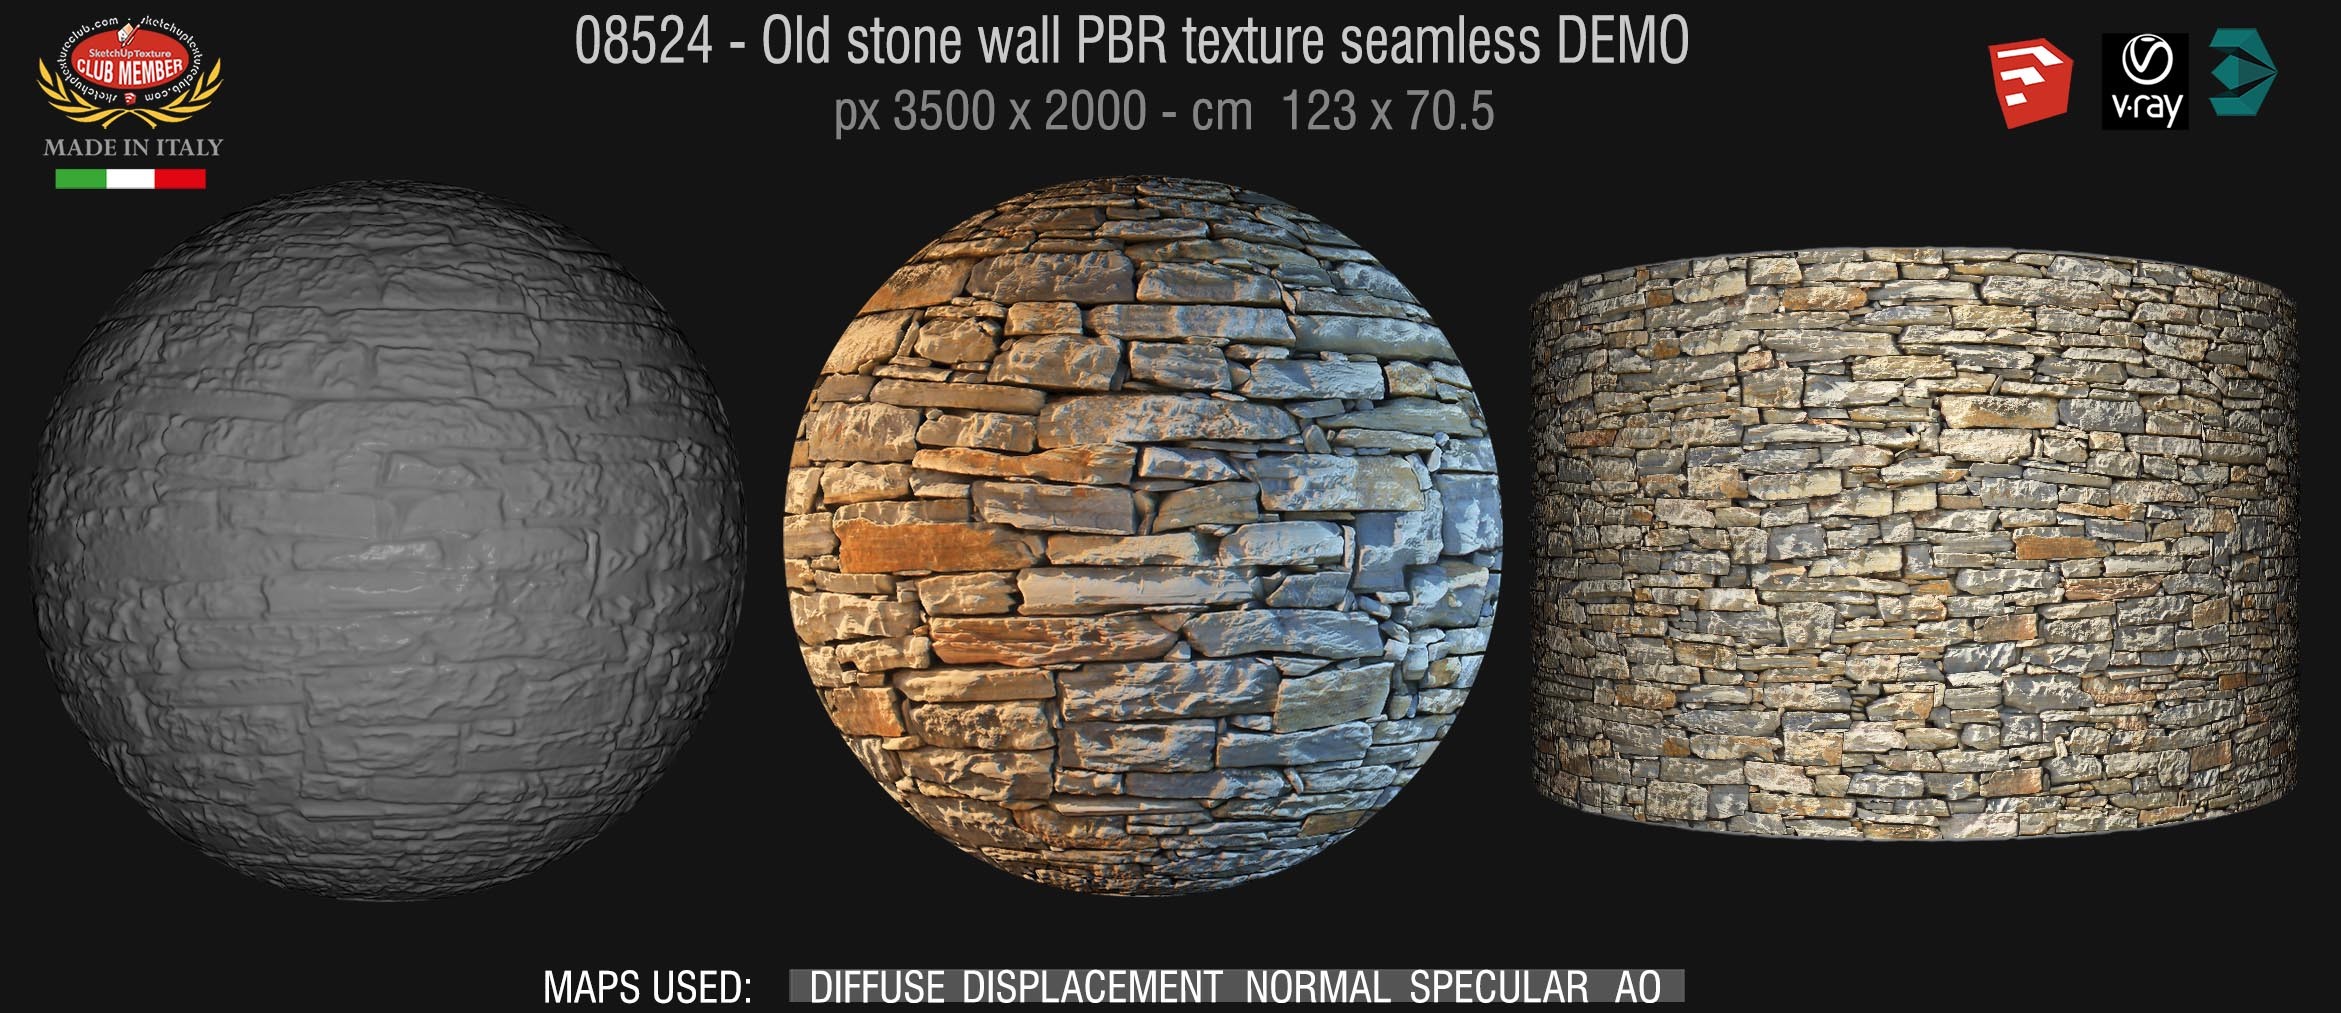 08524 Old stone wall PBR texture seamless DEMO